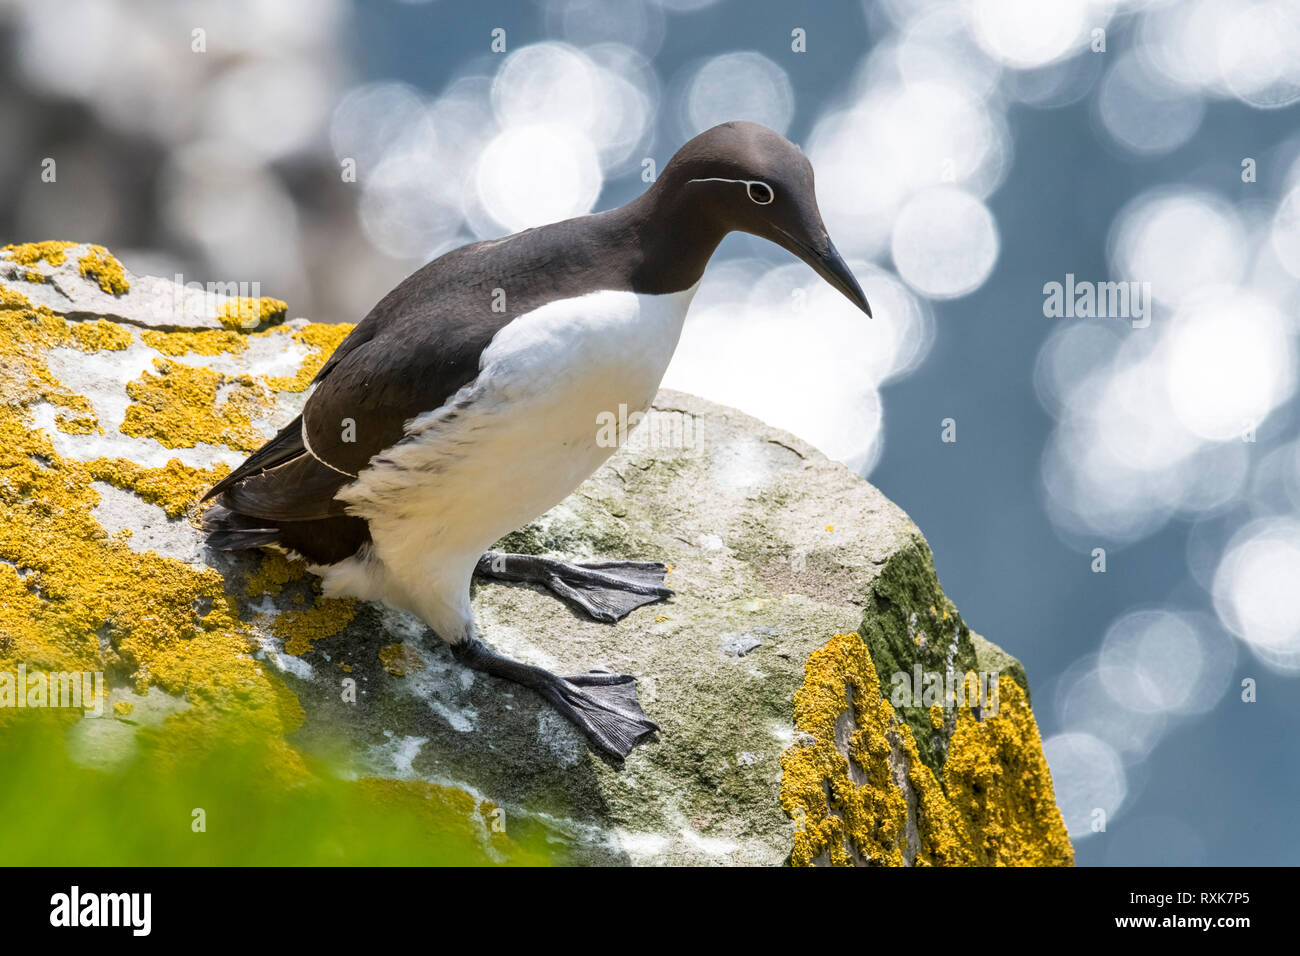 Common murre at Cape St. Mary's Ecological Reserve, nesting on rocks on face of cliff. Stock Photo